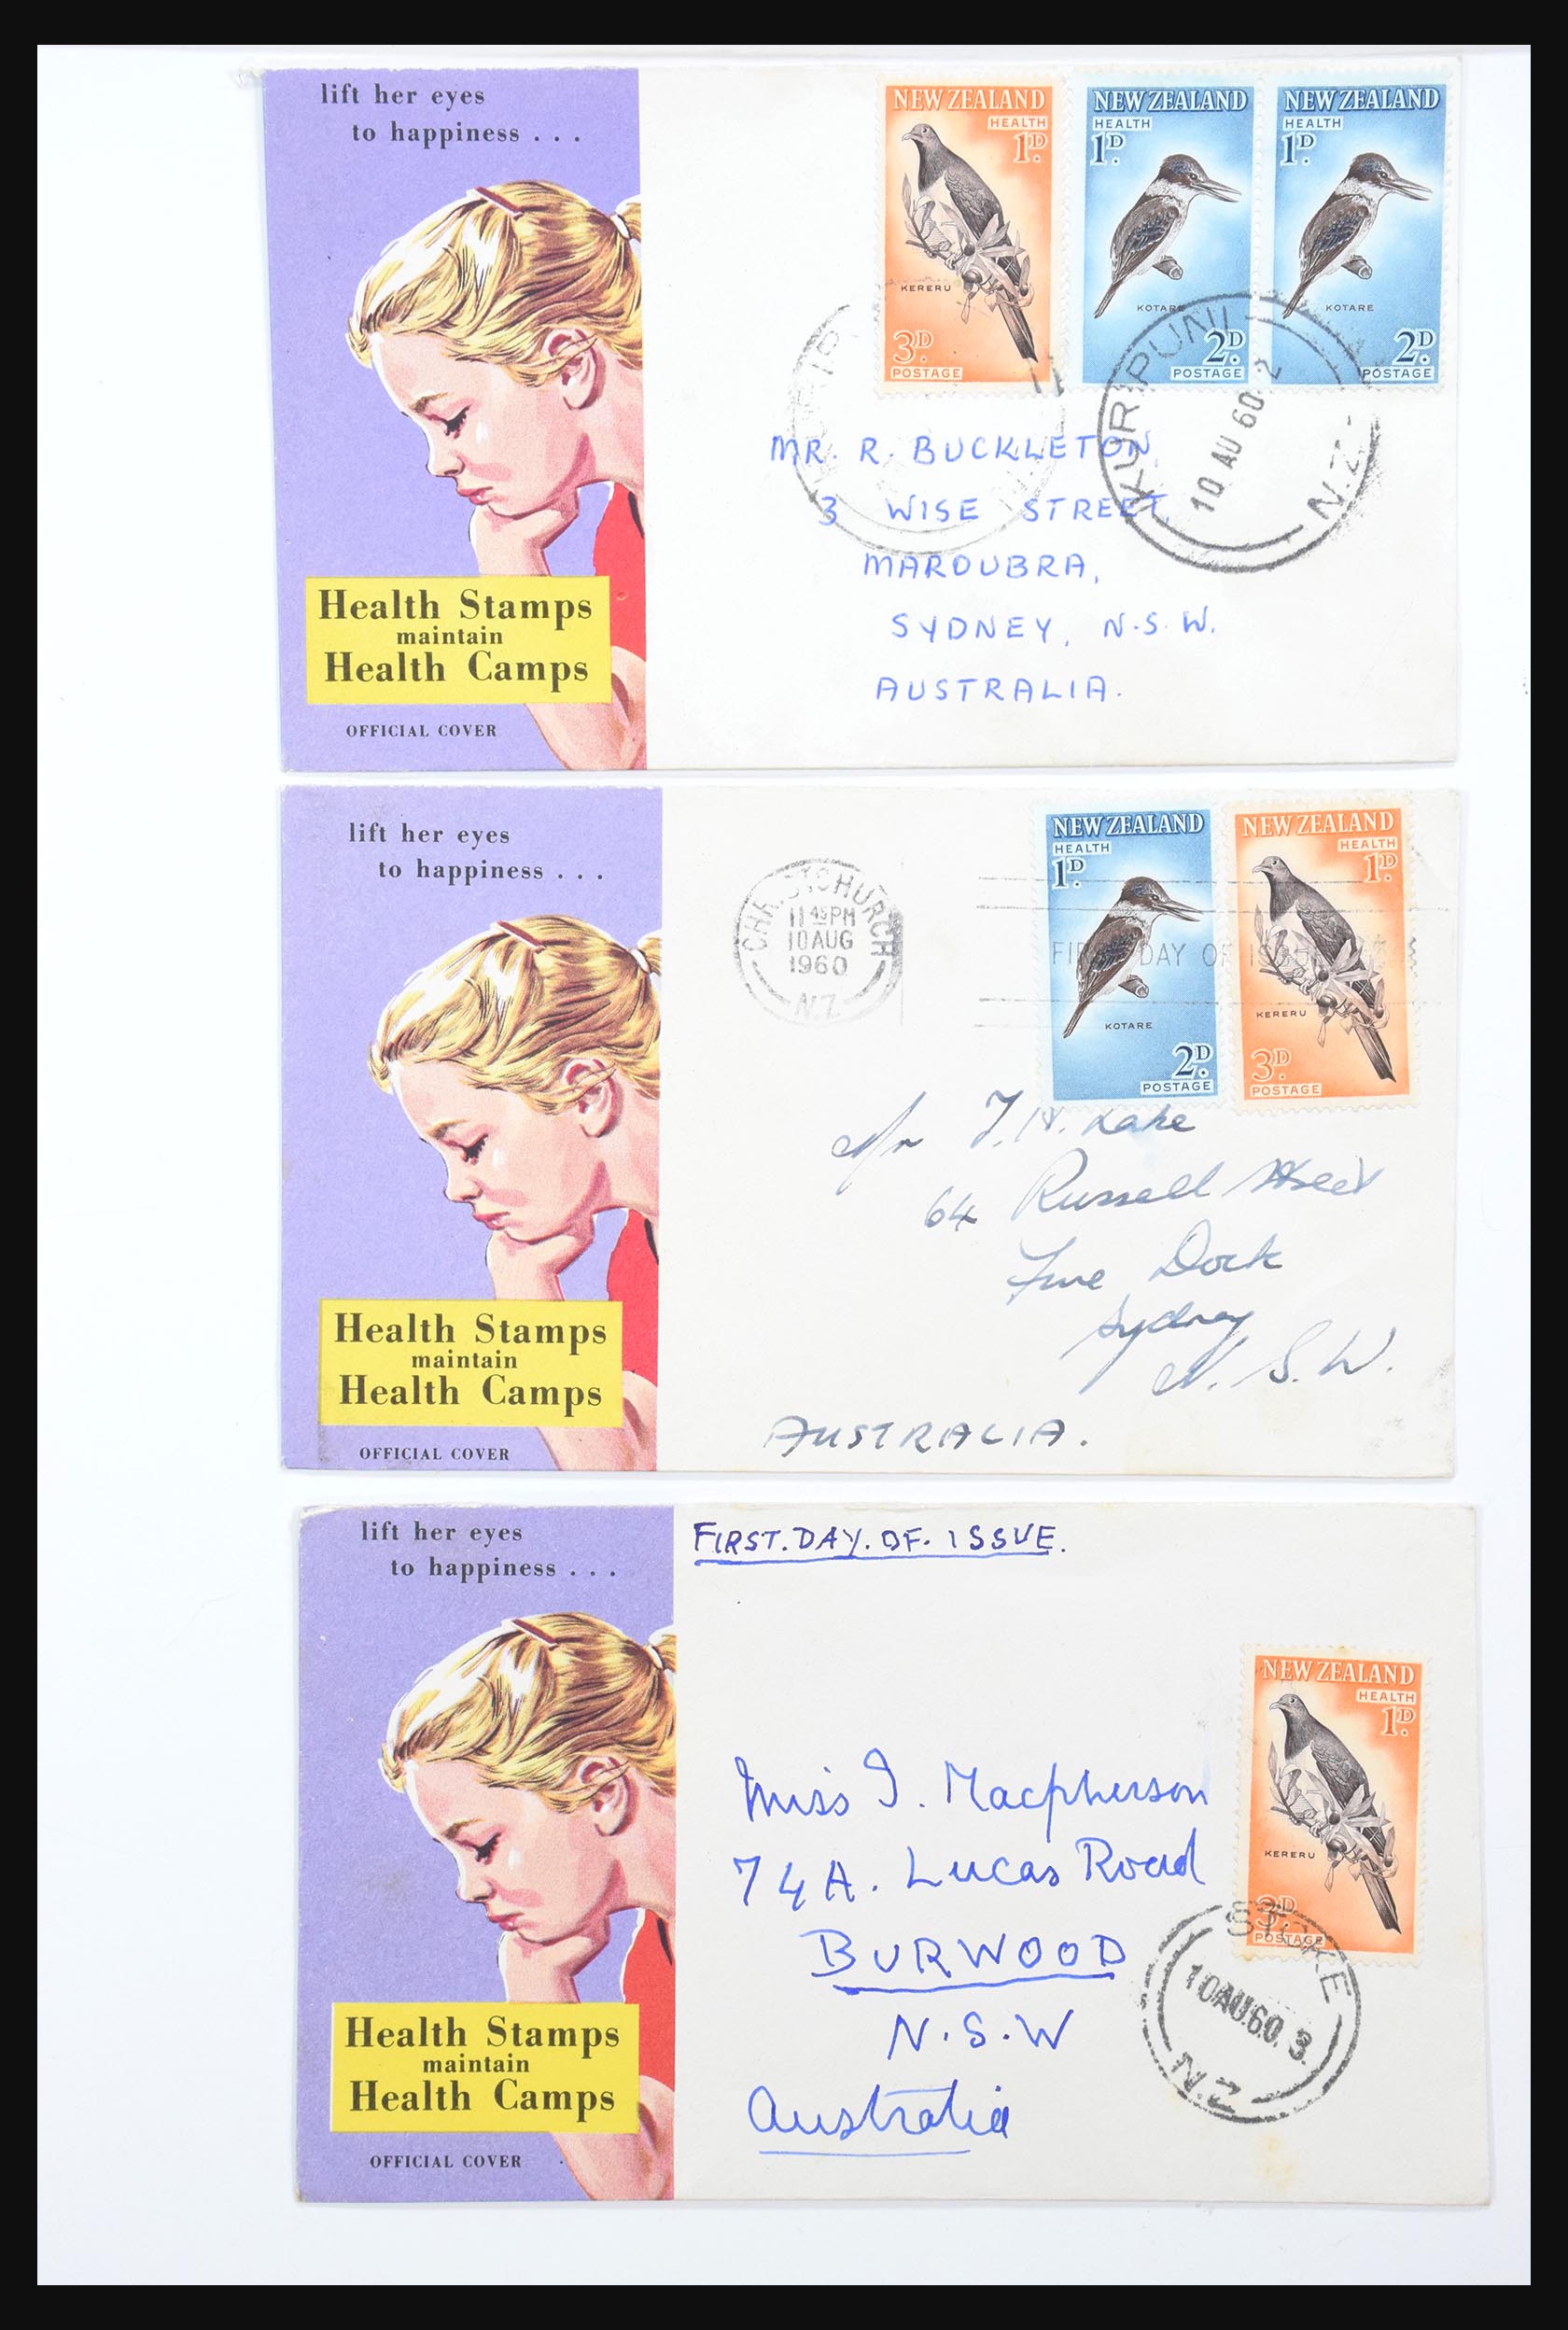 30821 007 - 30821 New Zealand FDC's 1960-1971.